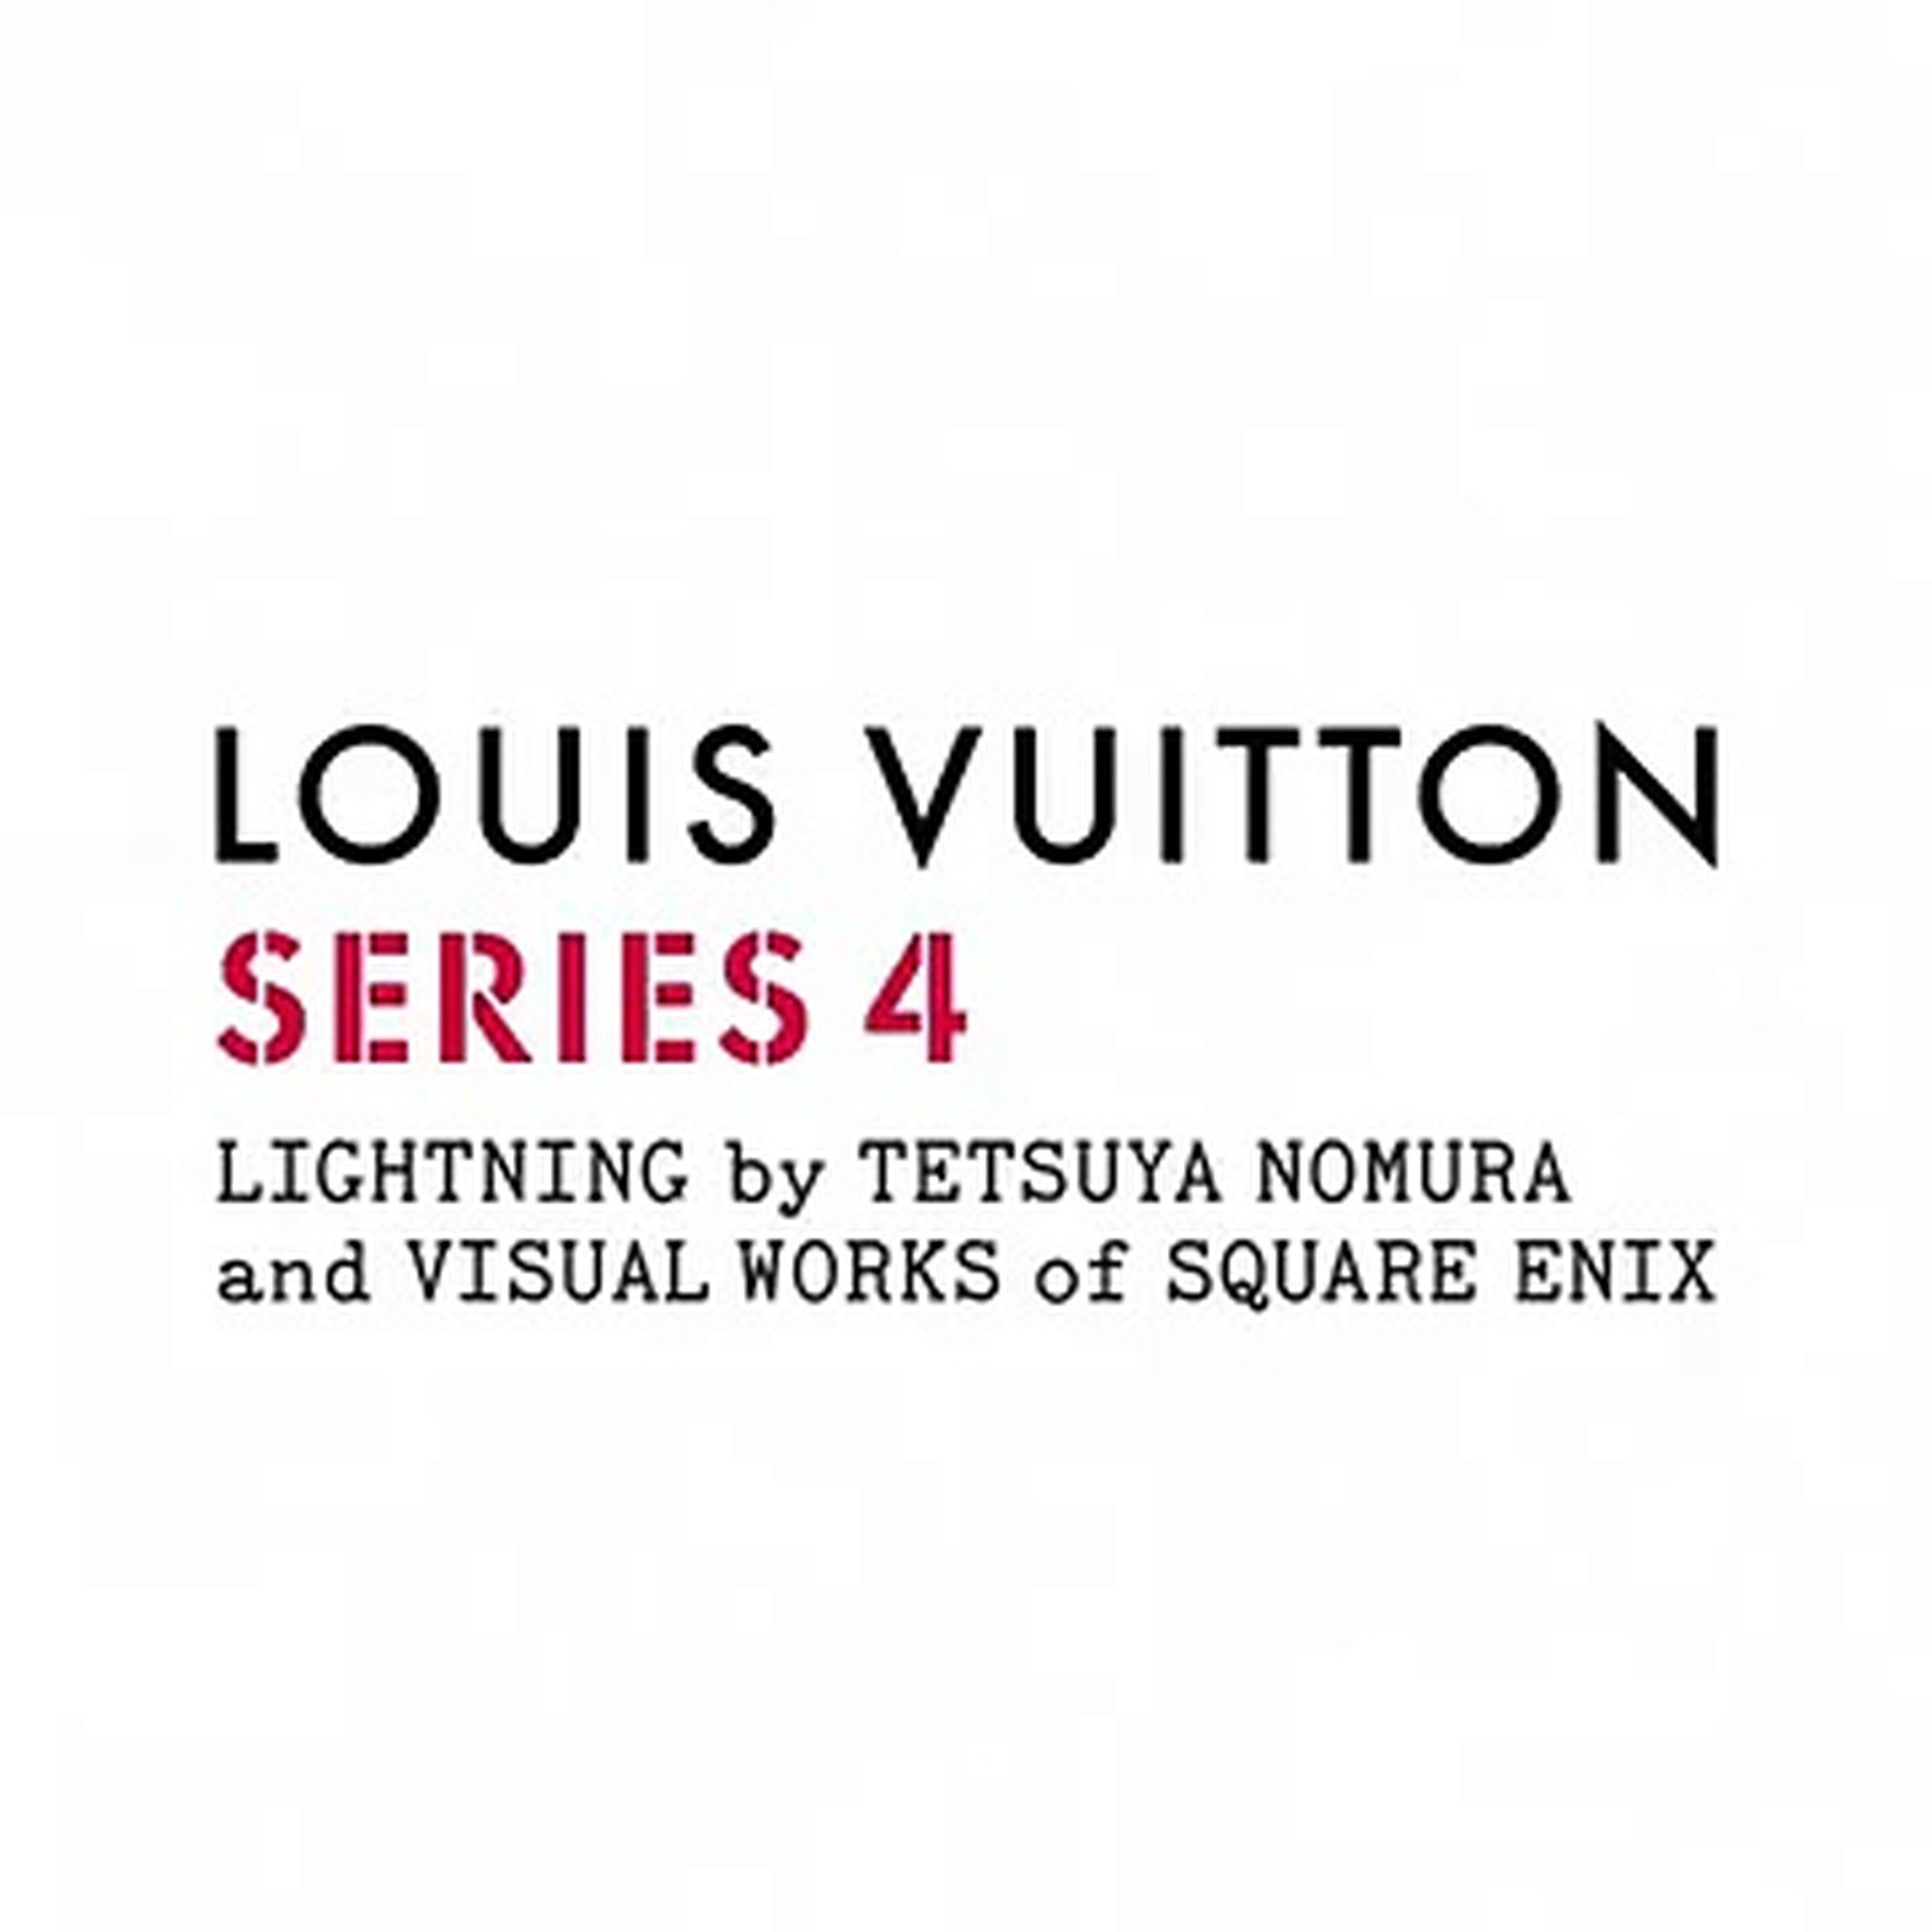 Lightning stars in new Louis Vuitton advertisement campaign